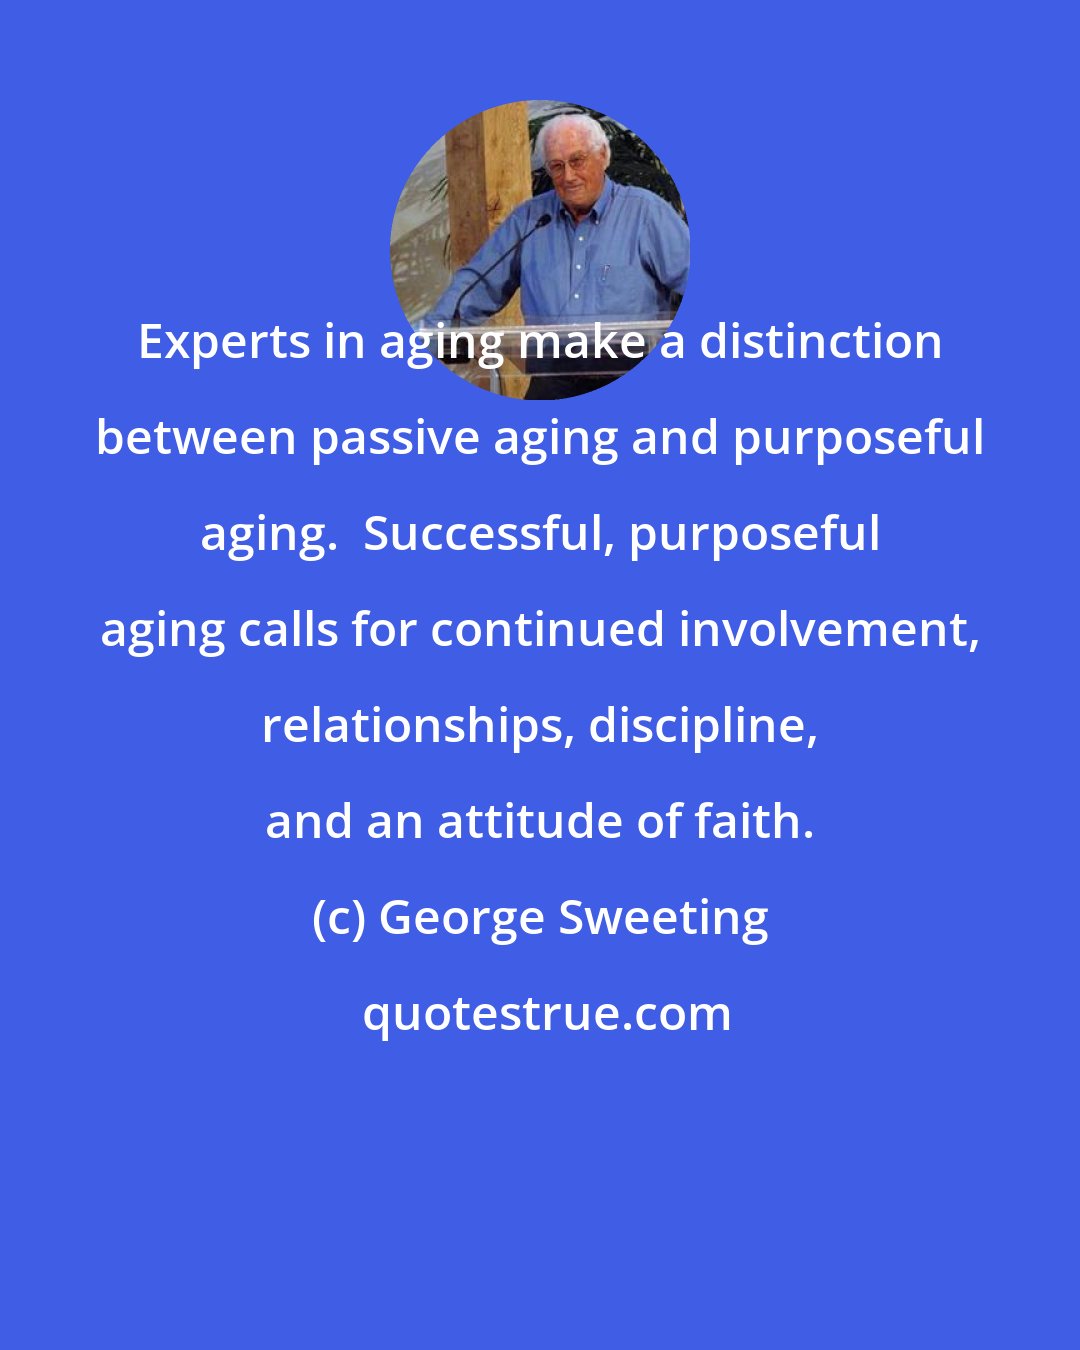 George Sweeting: Experts in aging make a distinction between passive aging and purposeful aging.  Successful, purposeful aging calls for continued involvement, relationships, discipline, and an attitude of faith.